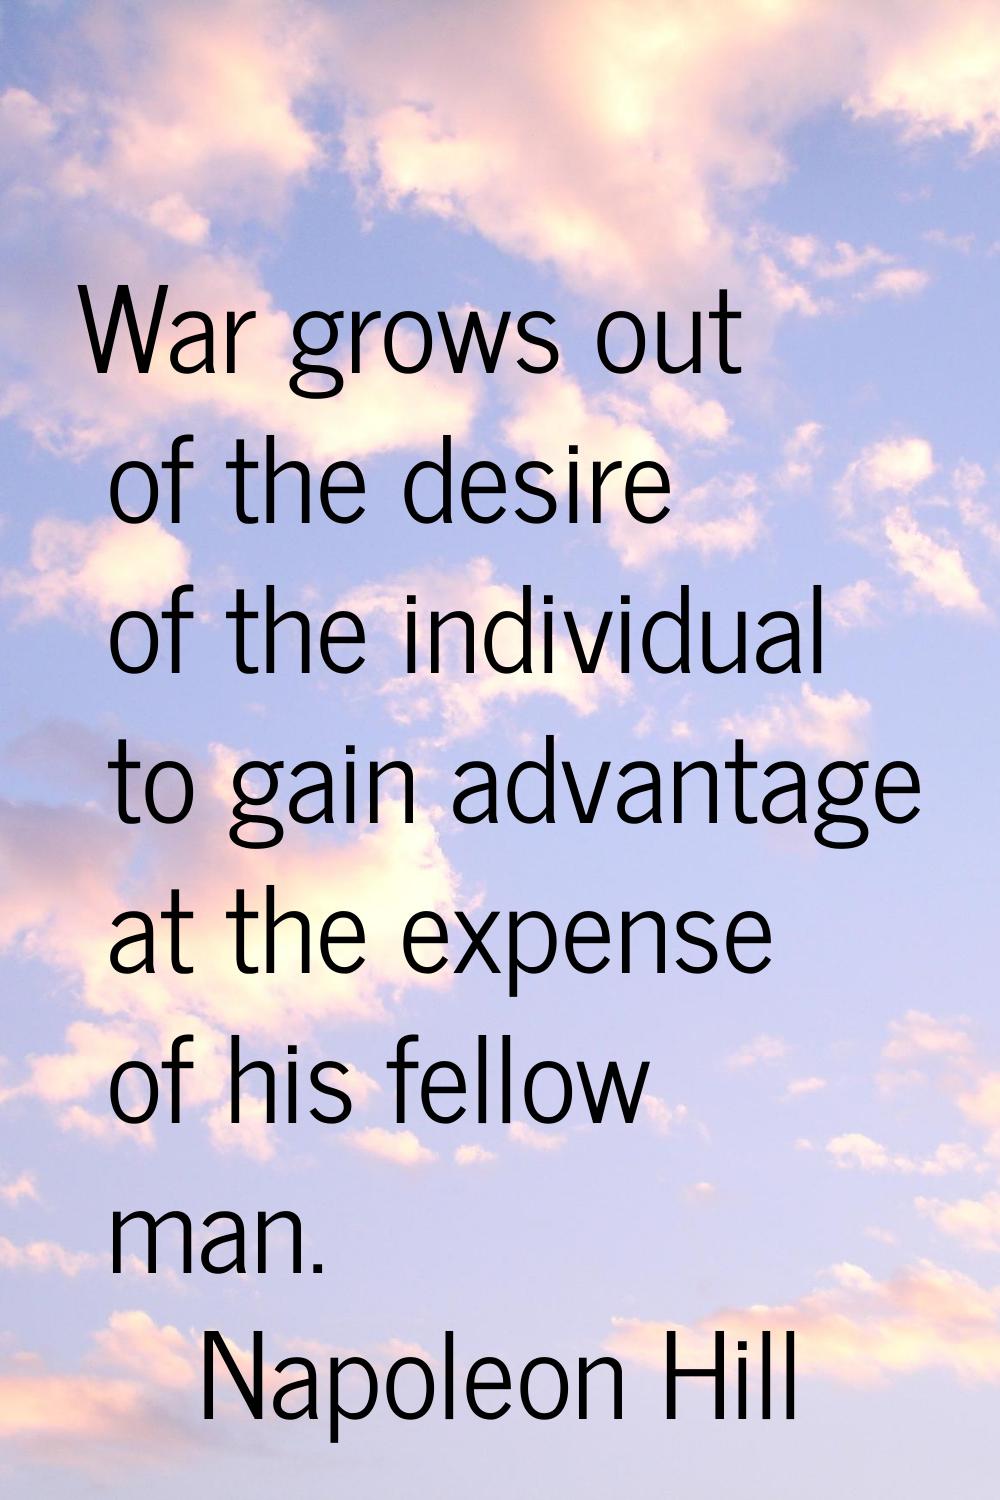 War grows out of the desire of the individual to gain advantage at the expense of his fellow man.